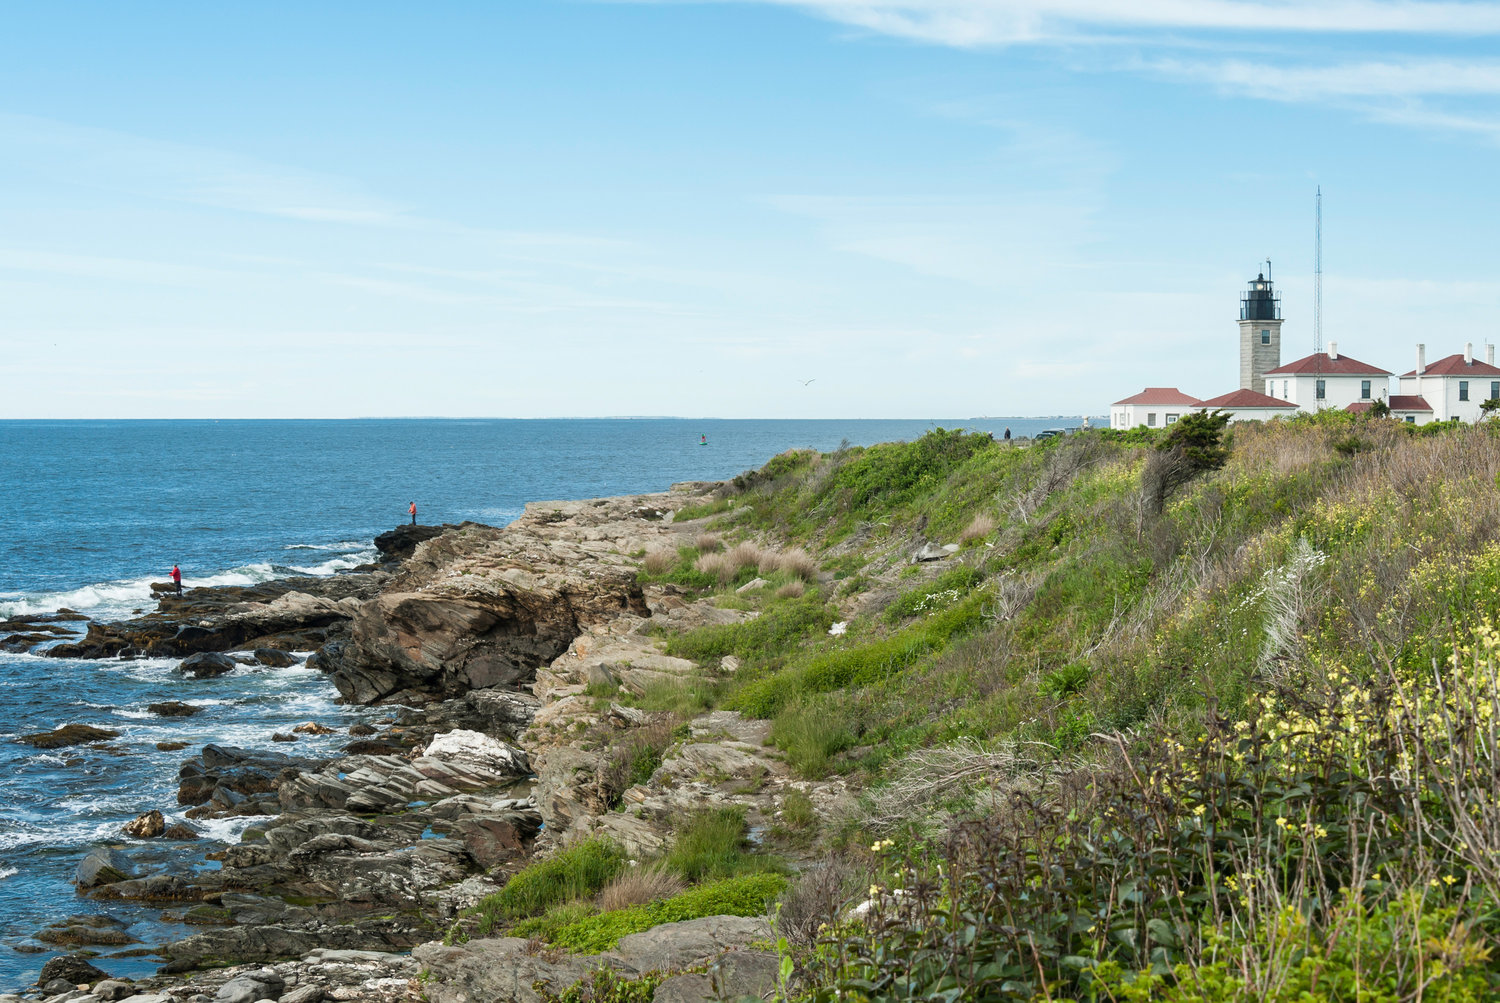 Prepare to whip out your phone or camera to capture the beauty of Beavertail State Park